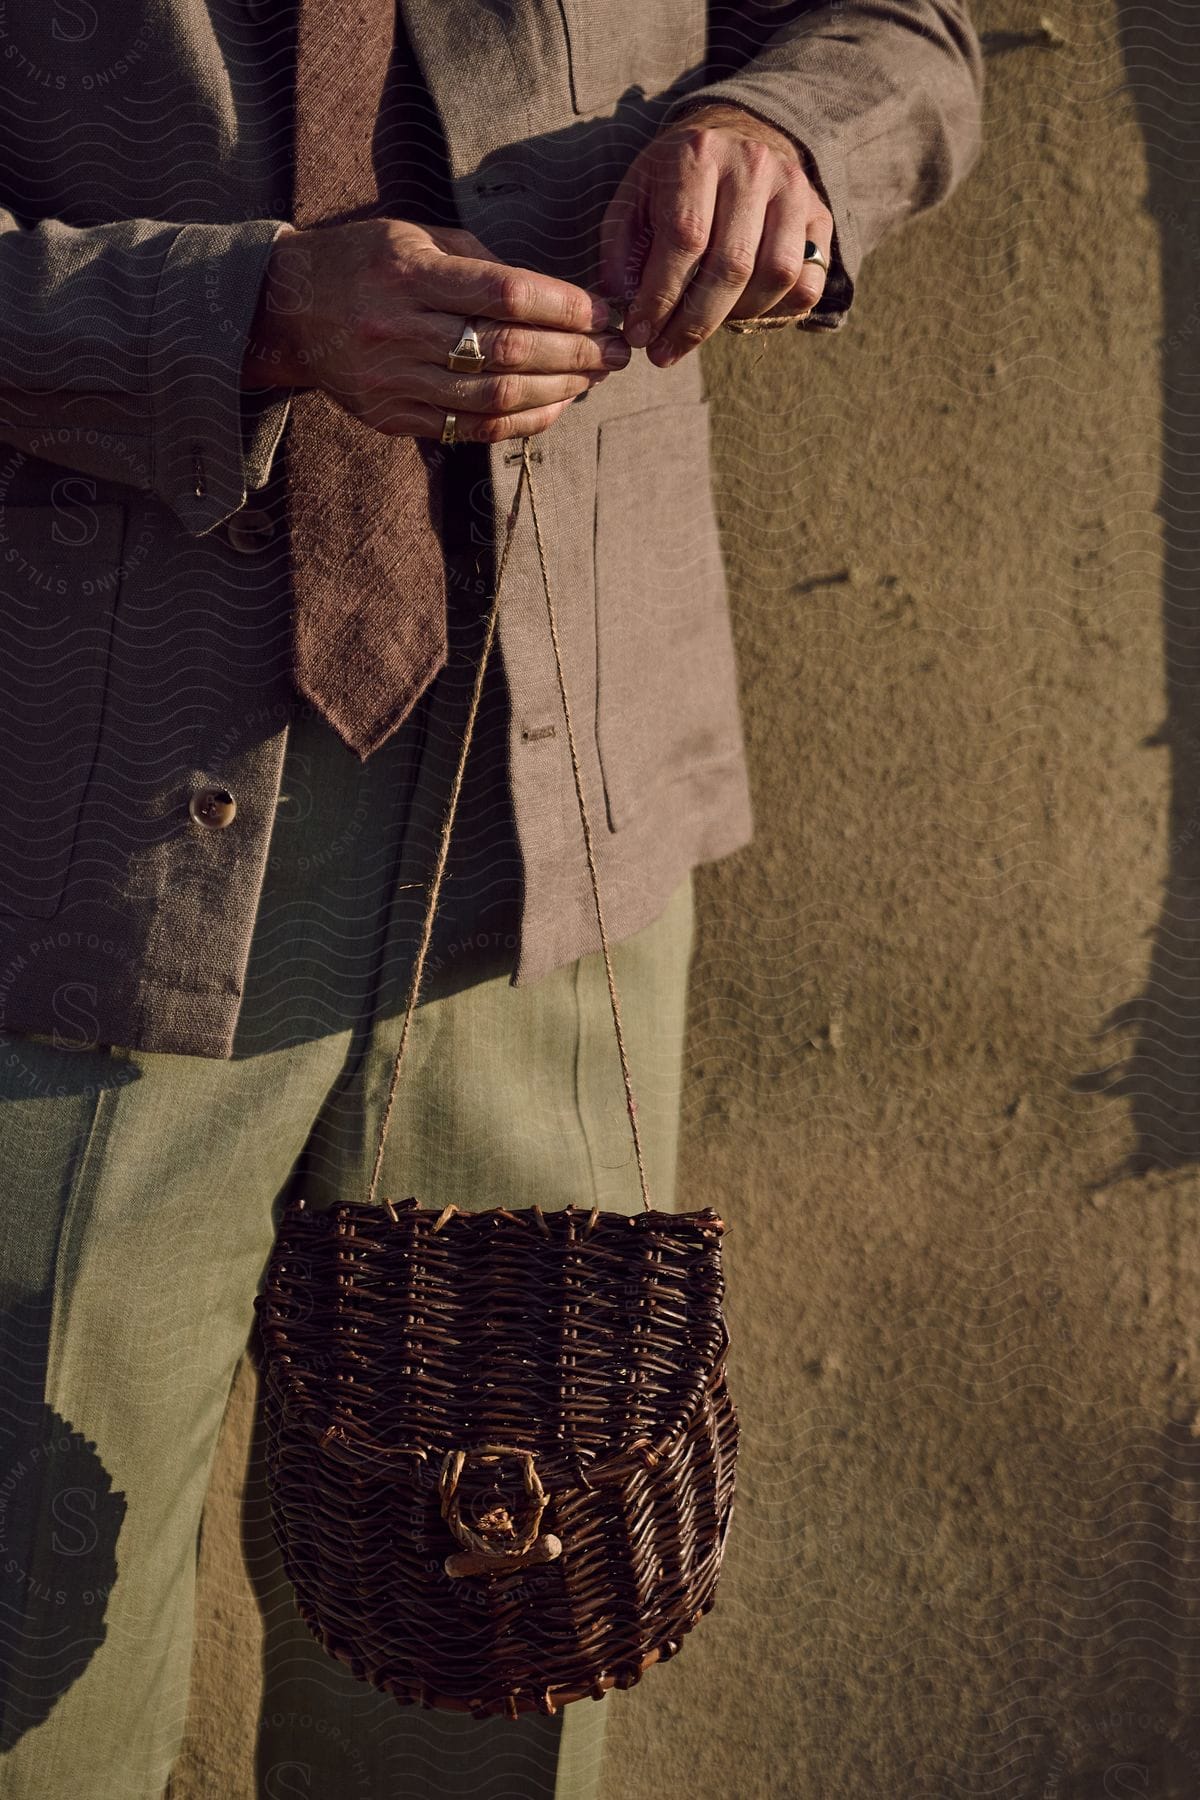 Close-up of a person's midsection with hands fastening a brown wicker bag; wearing a grey suit jacket, brown vest, and green trousers against a textured wall in daylight.